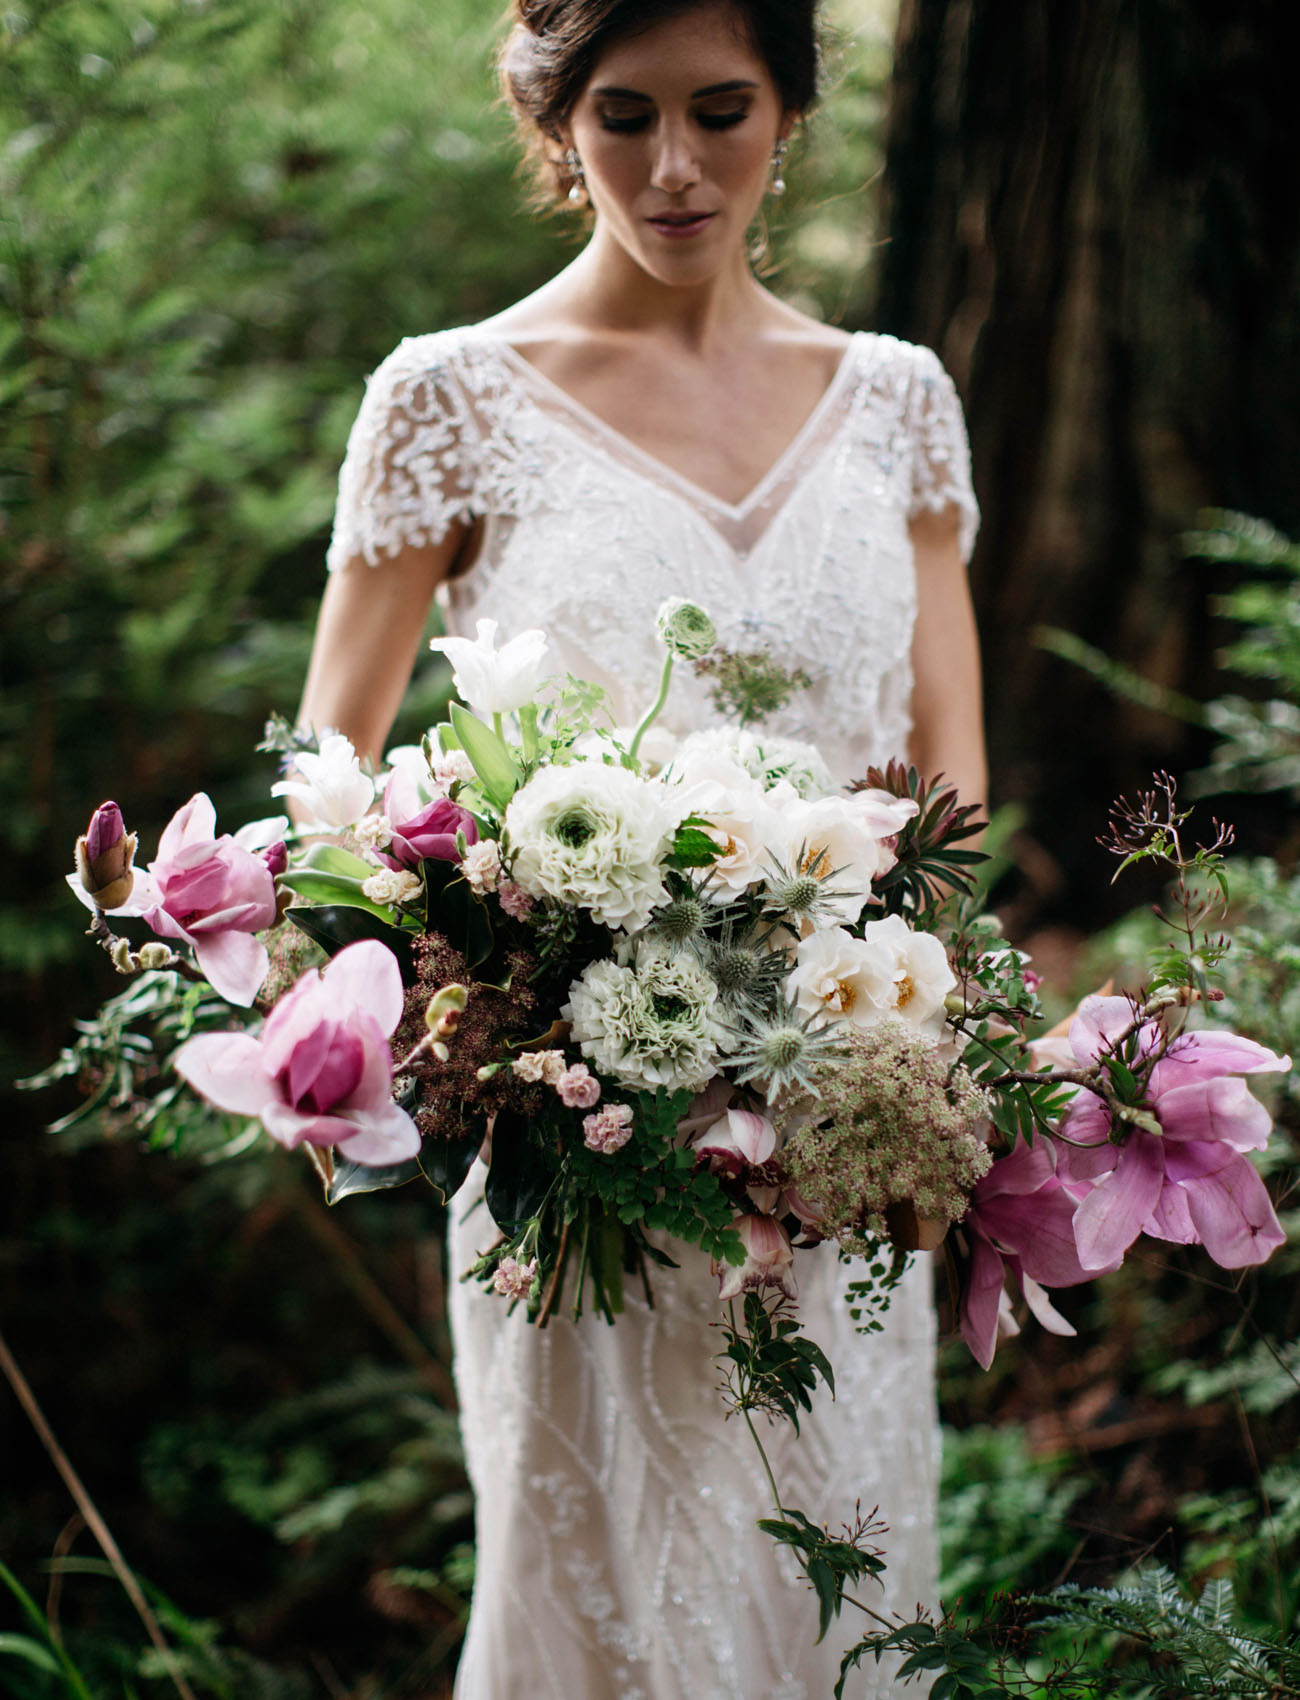 Her bouquet is messy as it's a woodland wedding and all the details shouldn't be polished